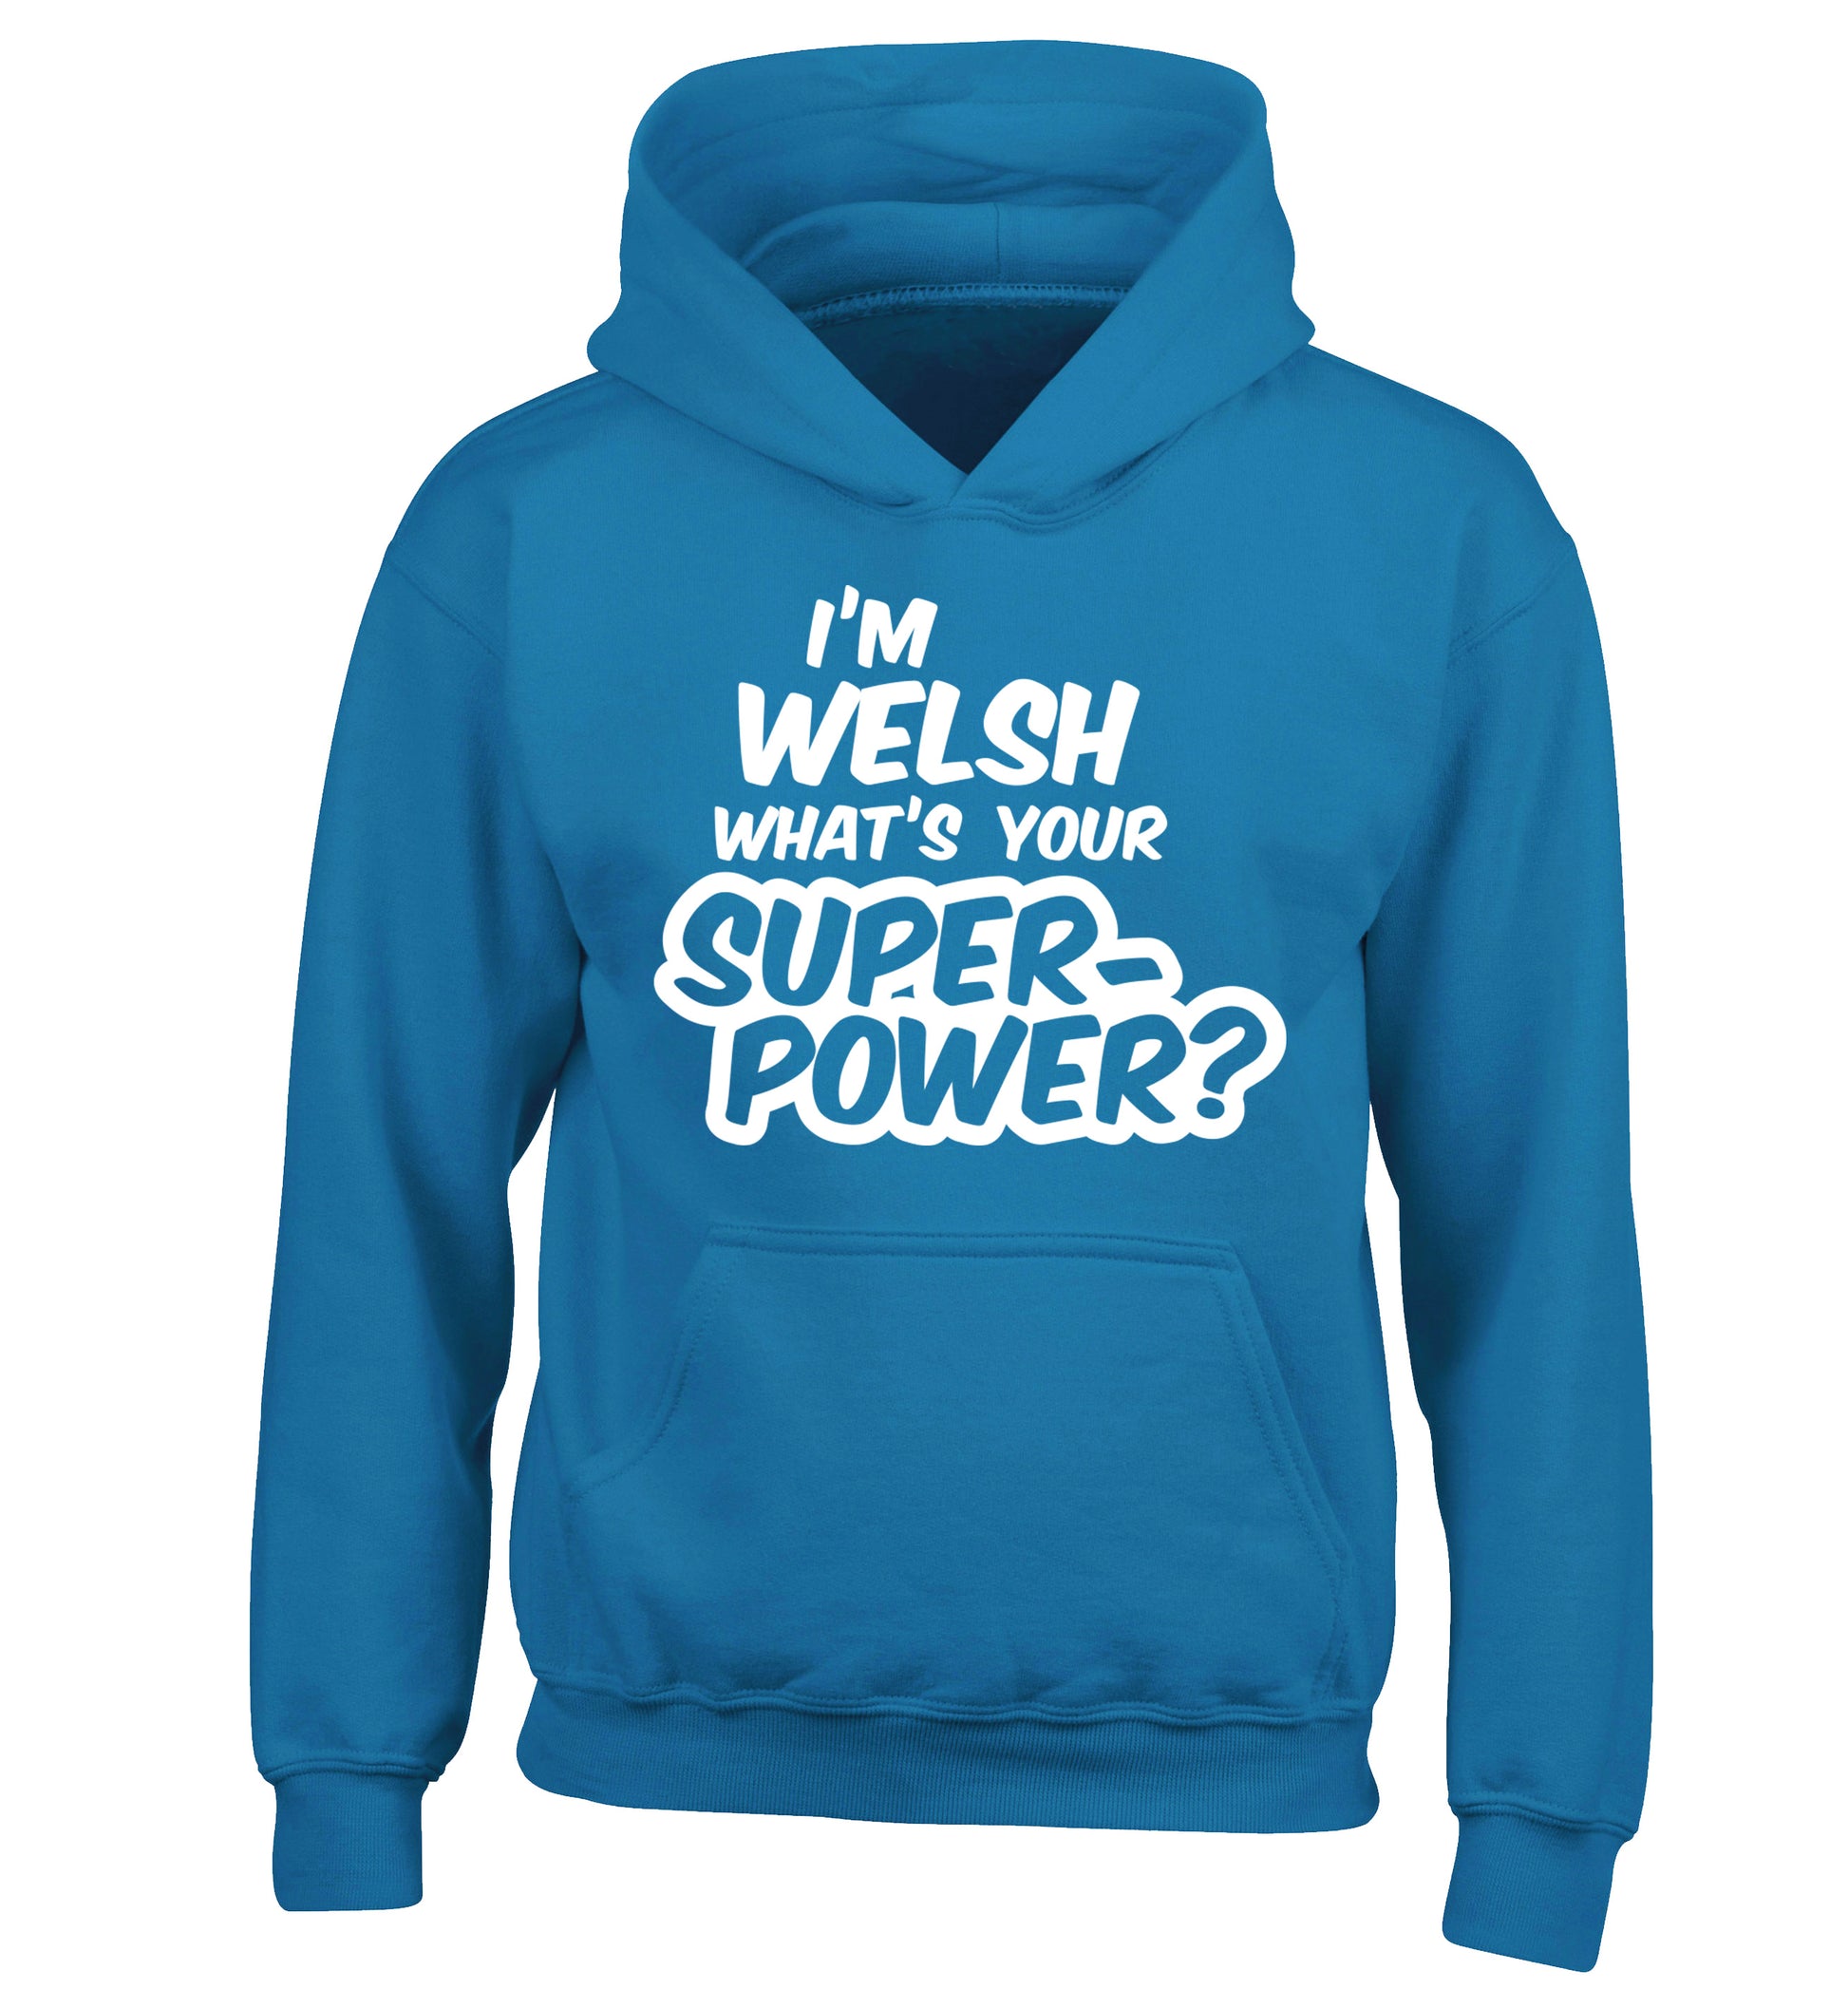 I'm Welsh what's your superpower? children's blue hoodie 12-13 Years